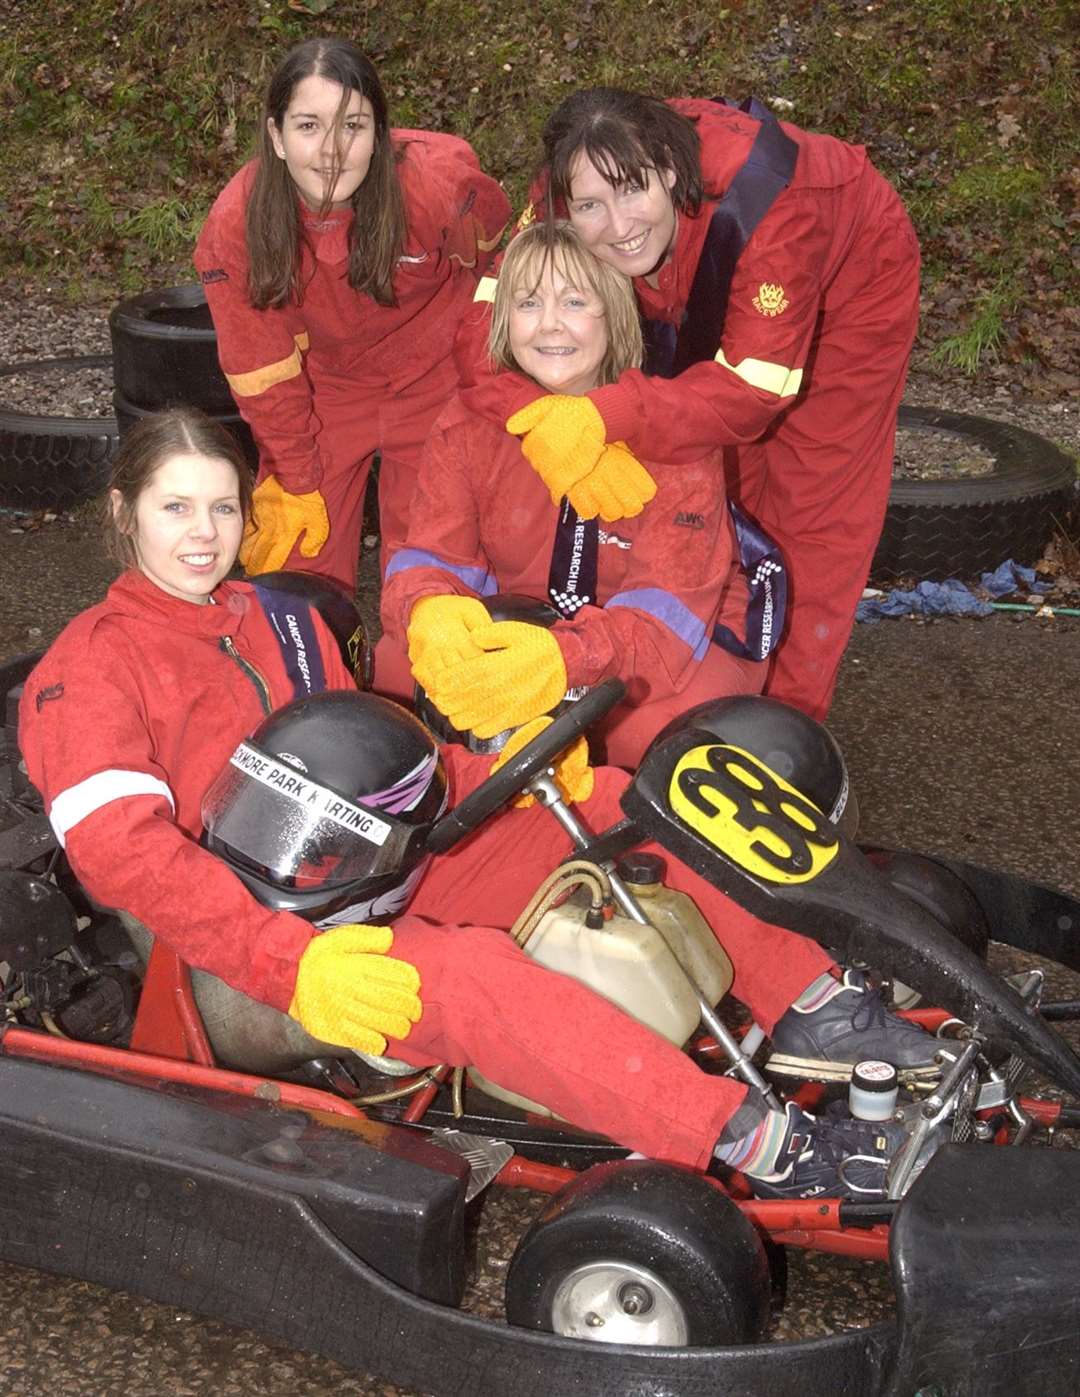 The 'Golden Girls' team of Tracey Jacobs, Liz Woodhouse, Karen Fox and Terri Jasper enjoyed a two-hour Cancer Research UK endurance race in January 2004. Picture: Andy Payton